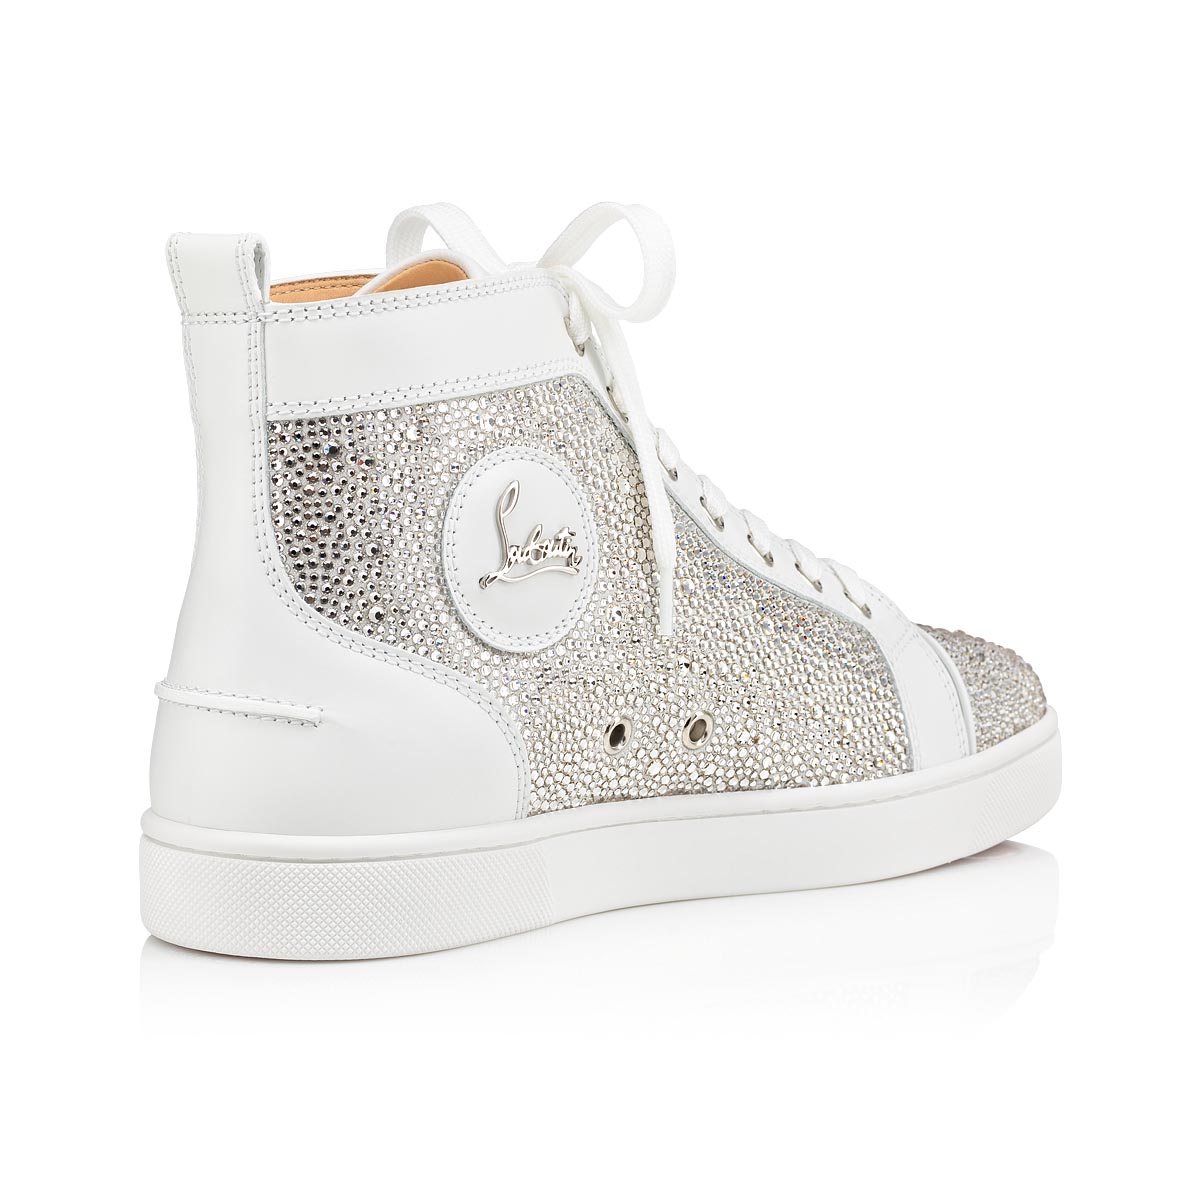 Christian Louboutin Men's Louis Leather High-Top Sneakers - White - Size 9.5